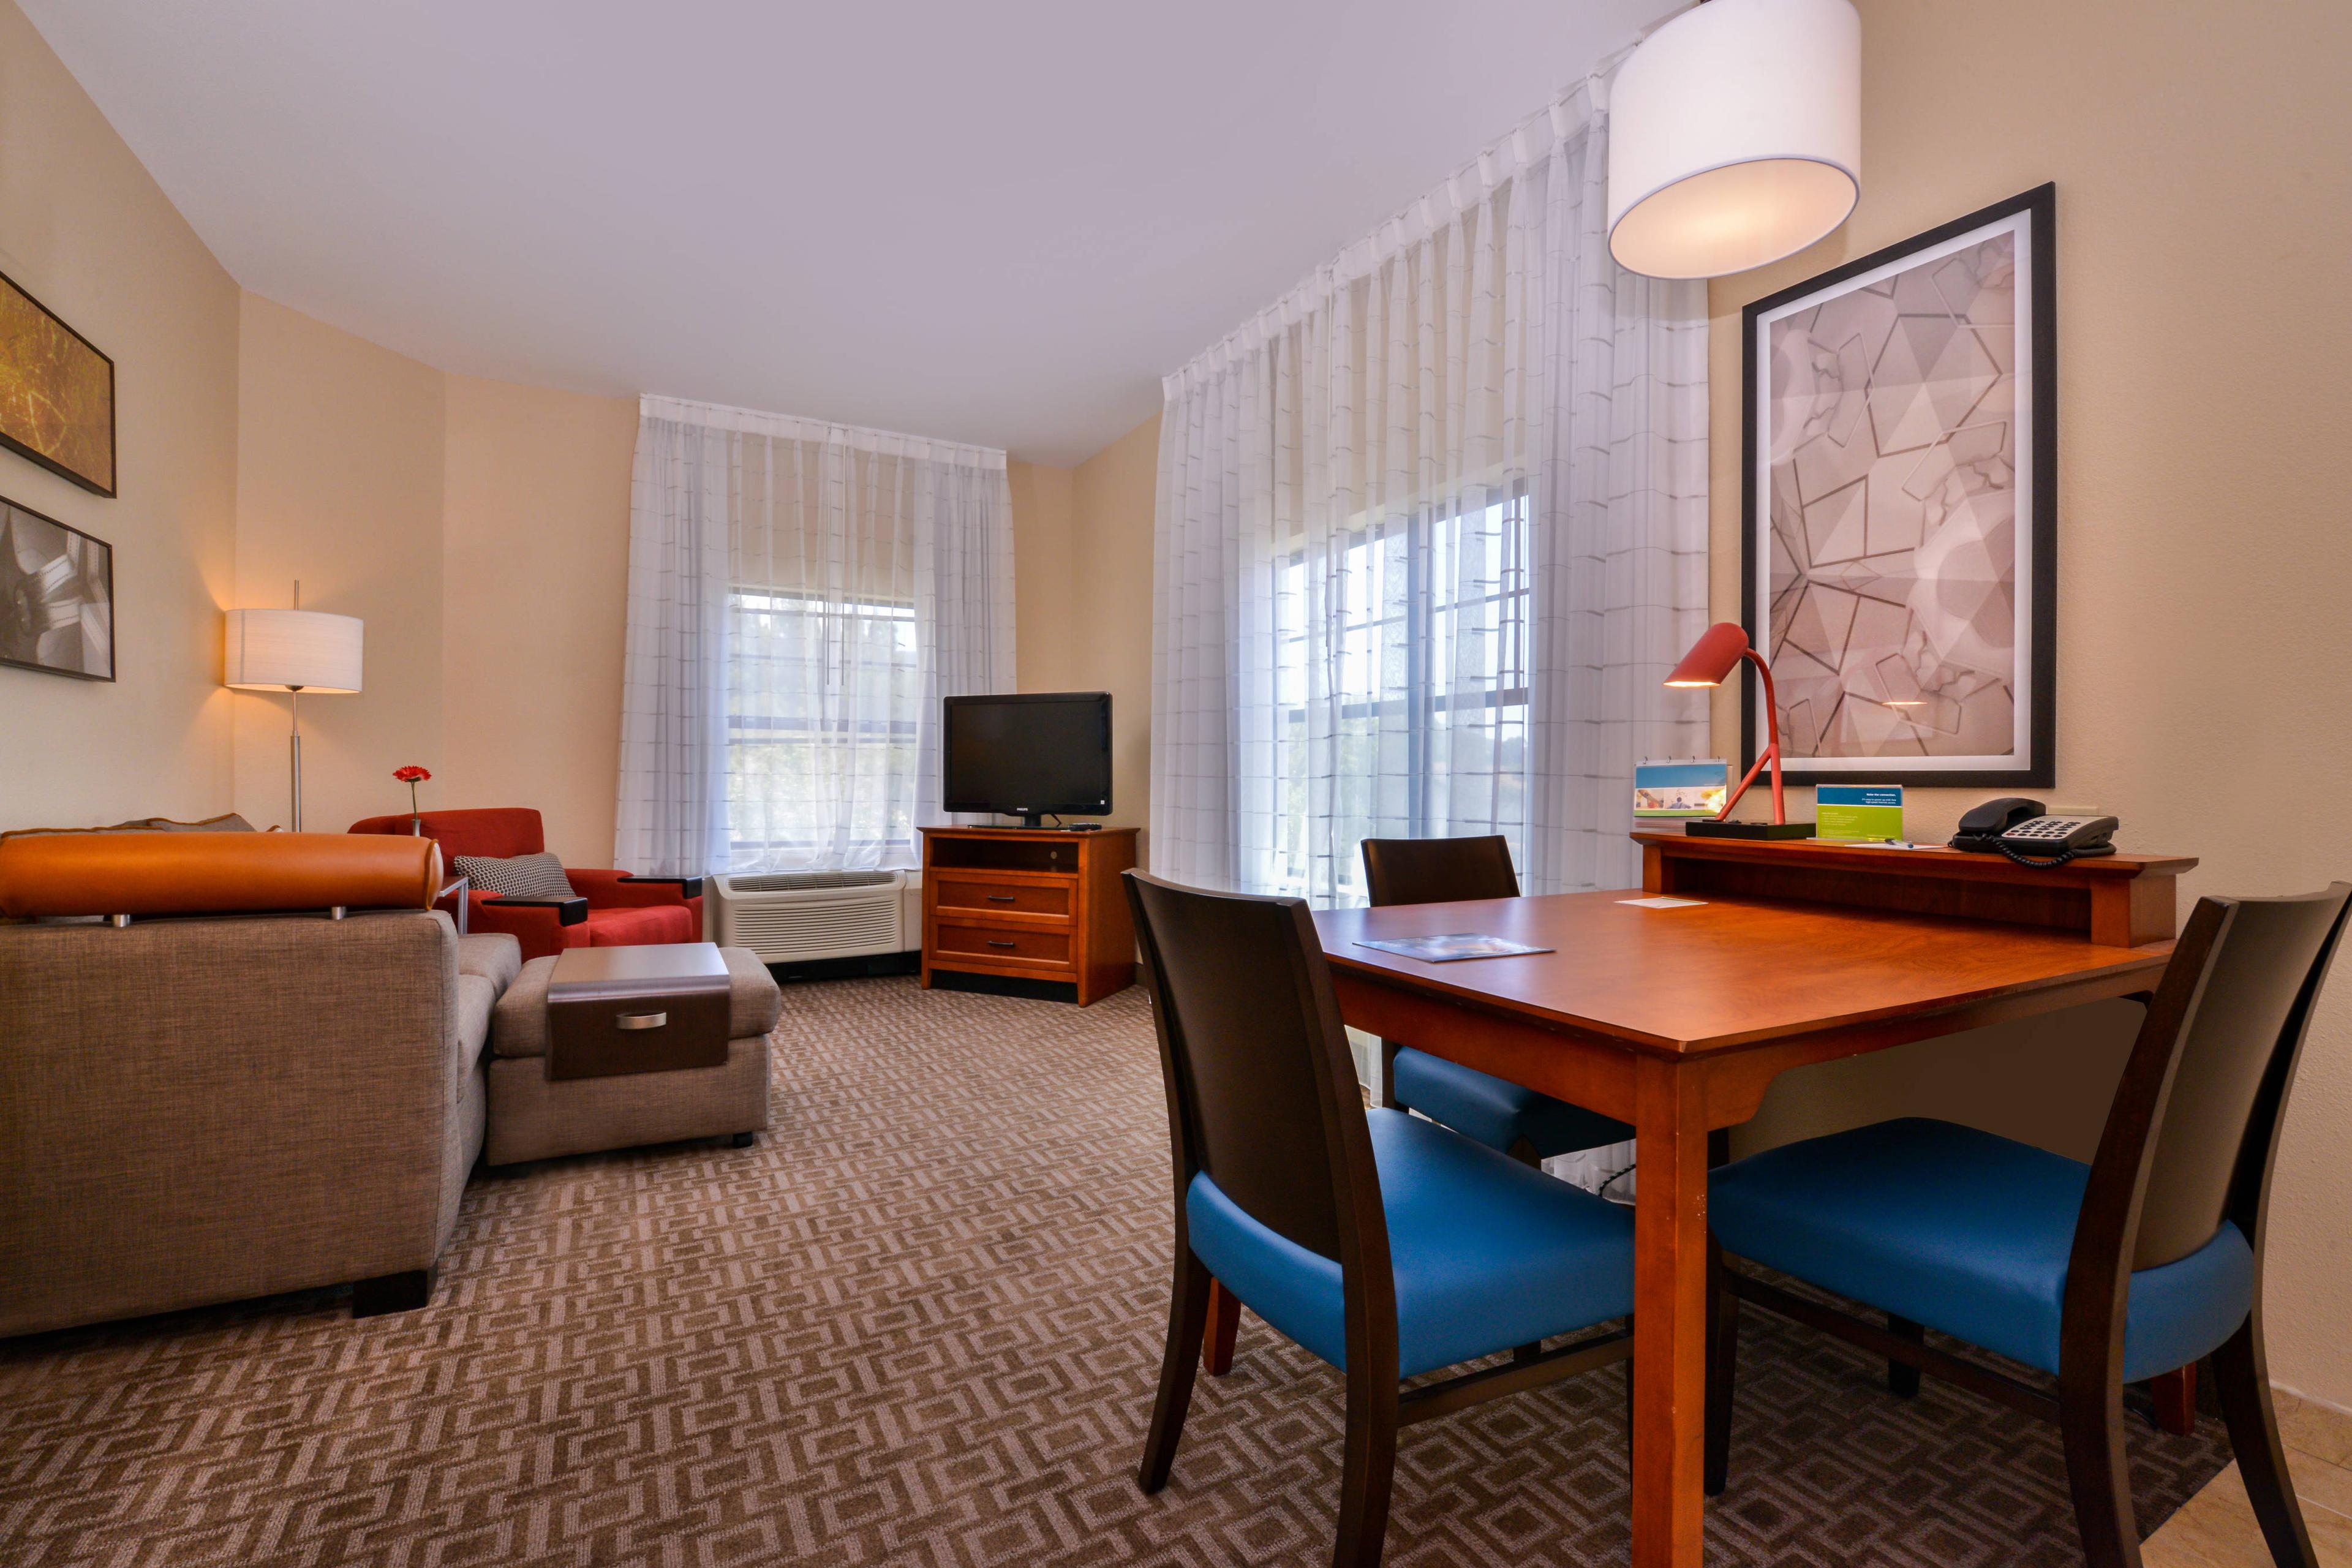 With plenty of space for relaxing, working or dining the One-Bedroom Suite is tastefully decorated and features complimentary Wi-Fi.